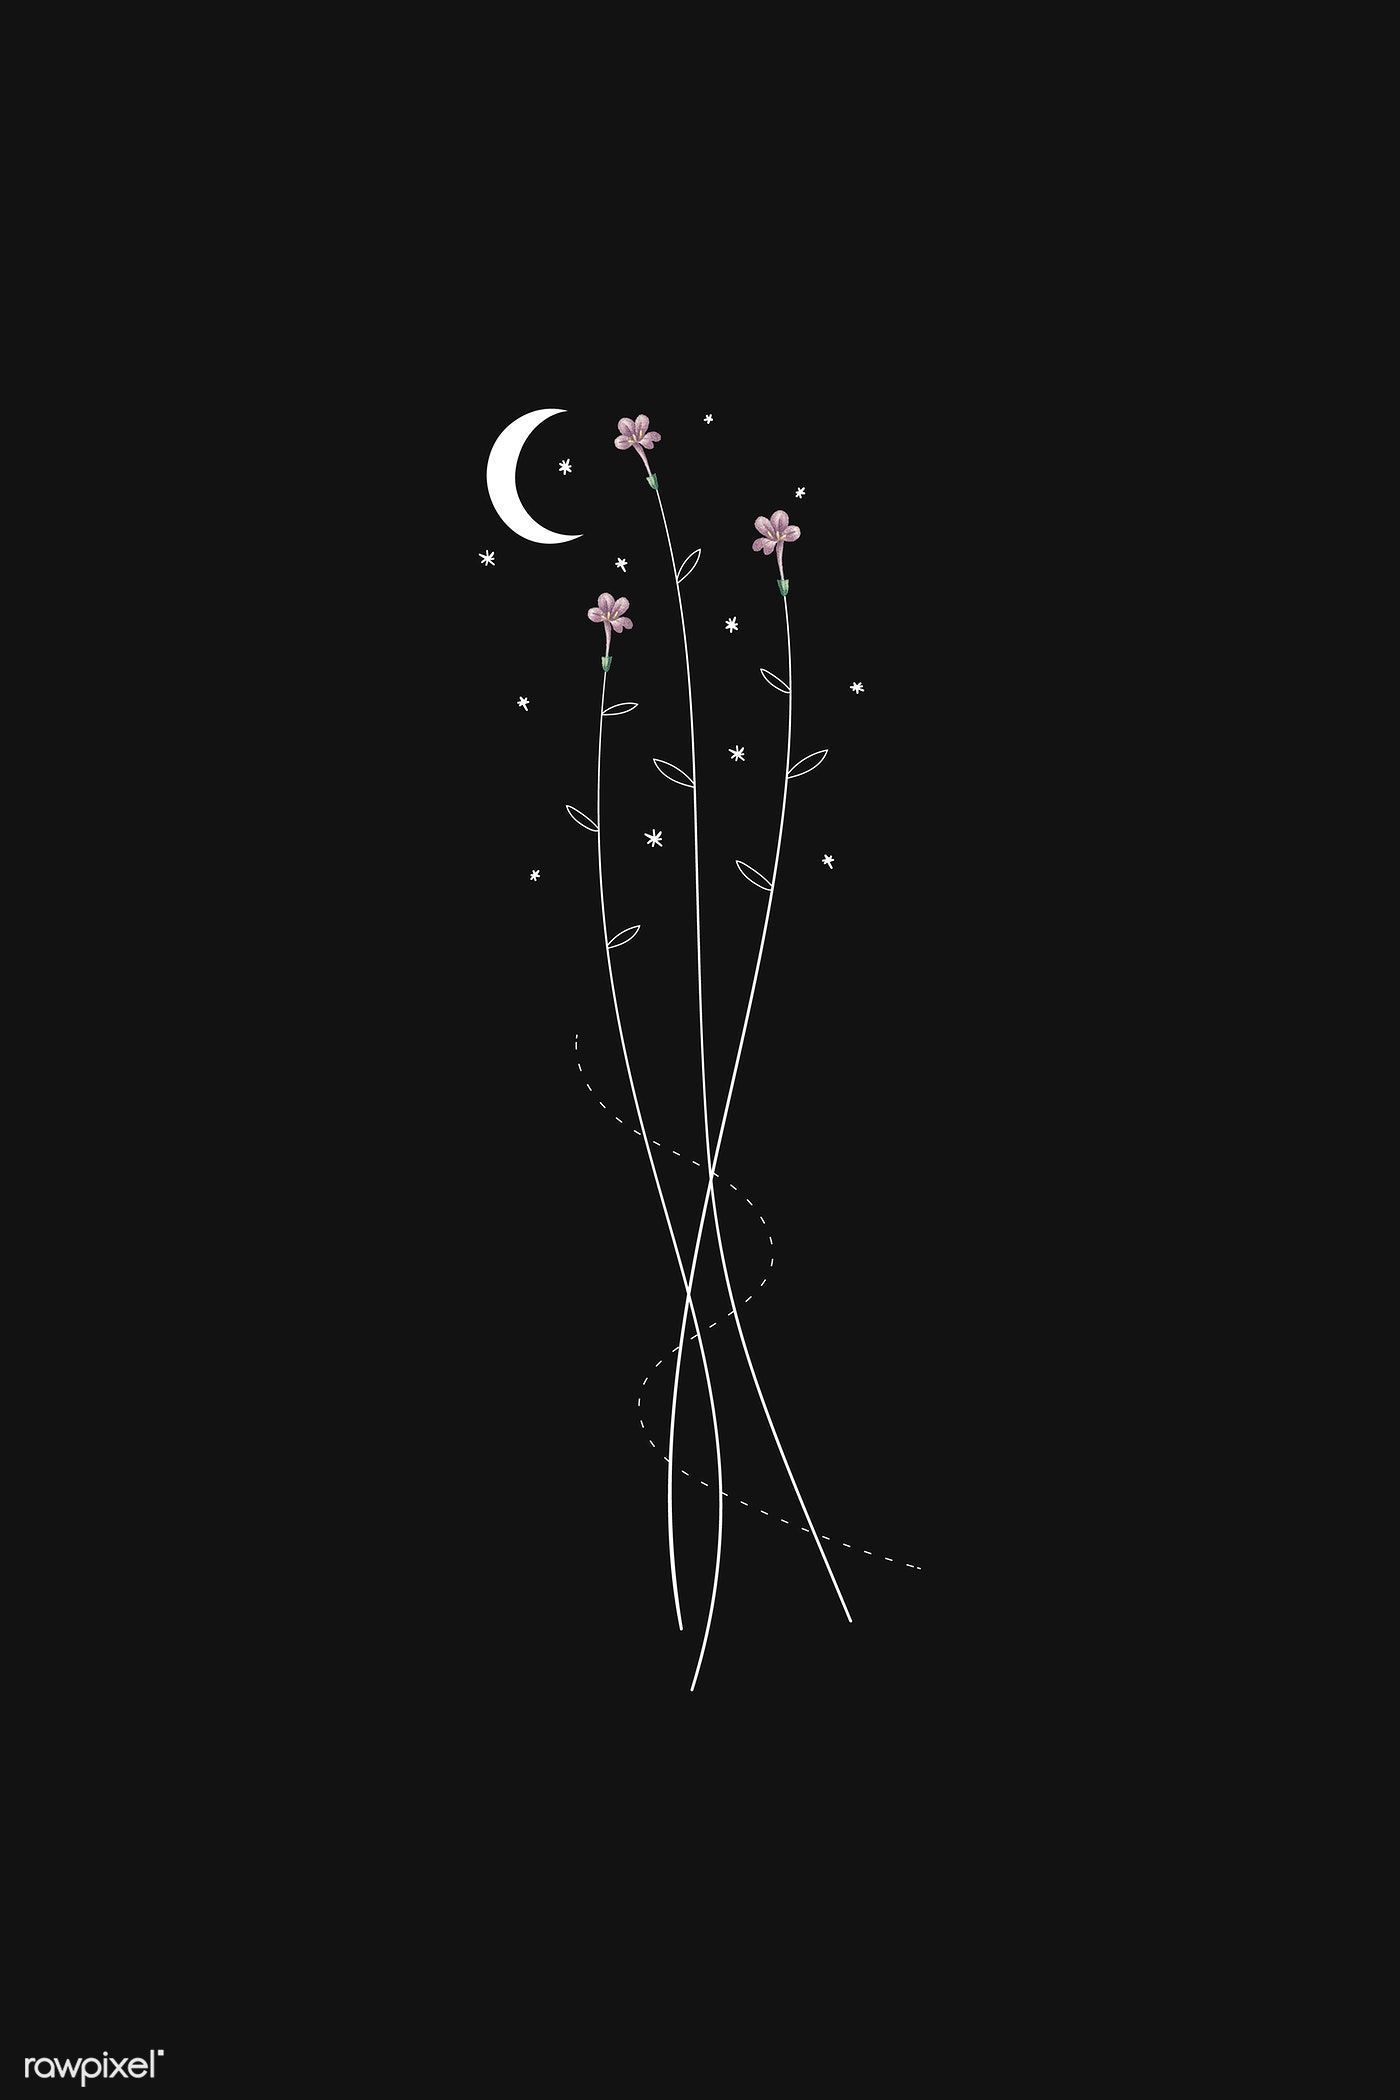 Download premium vector of Flowers and a moon on a black